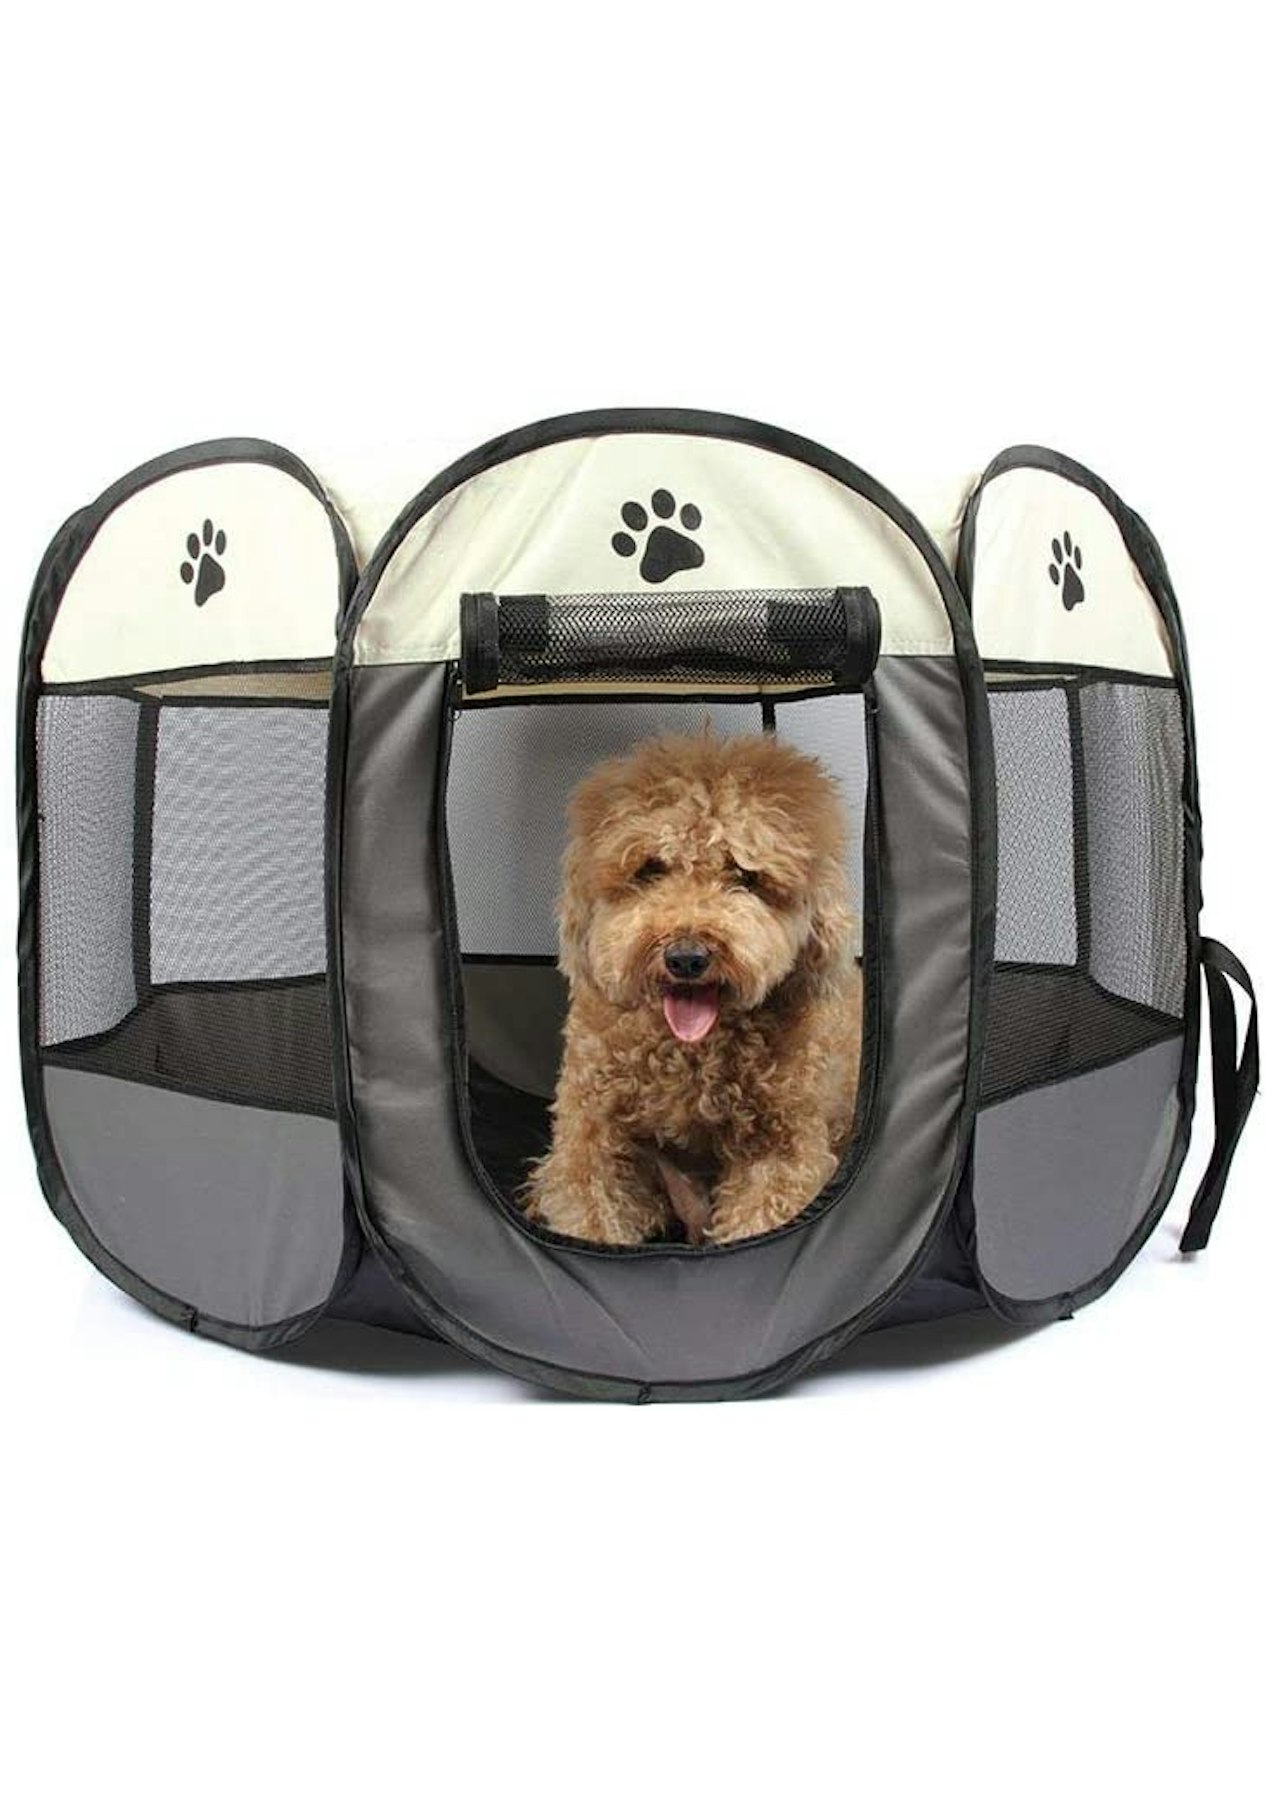 HORING Dog playpens Large Portable Pets Tent Indoor & Outdoor Pen Kennel for Dogs Puppy Cats Rabbits Small Animals 